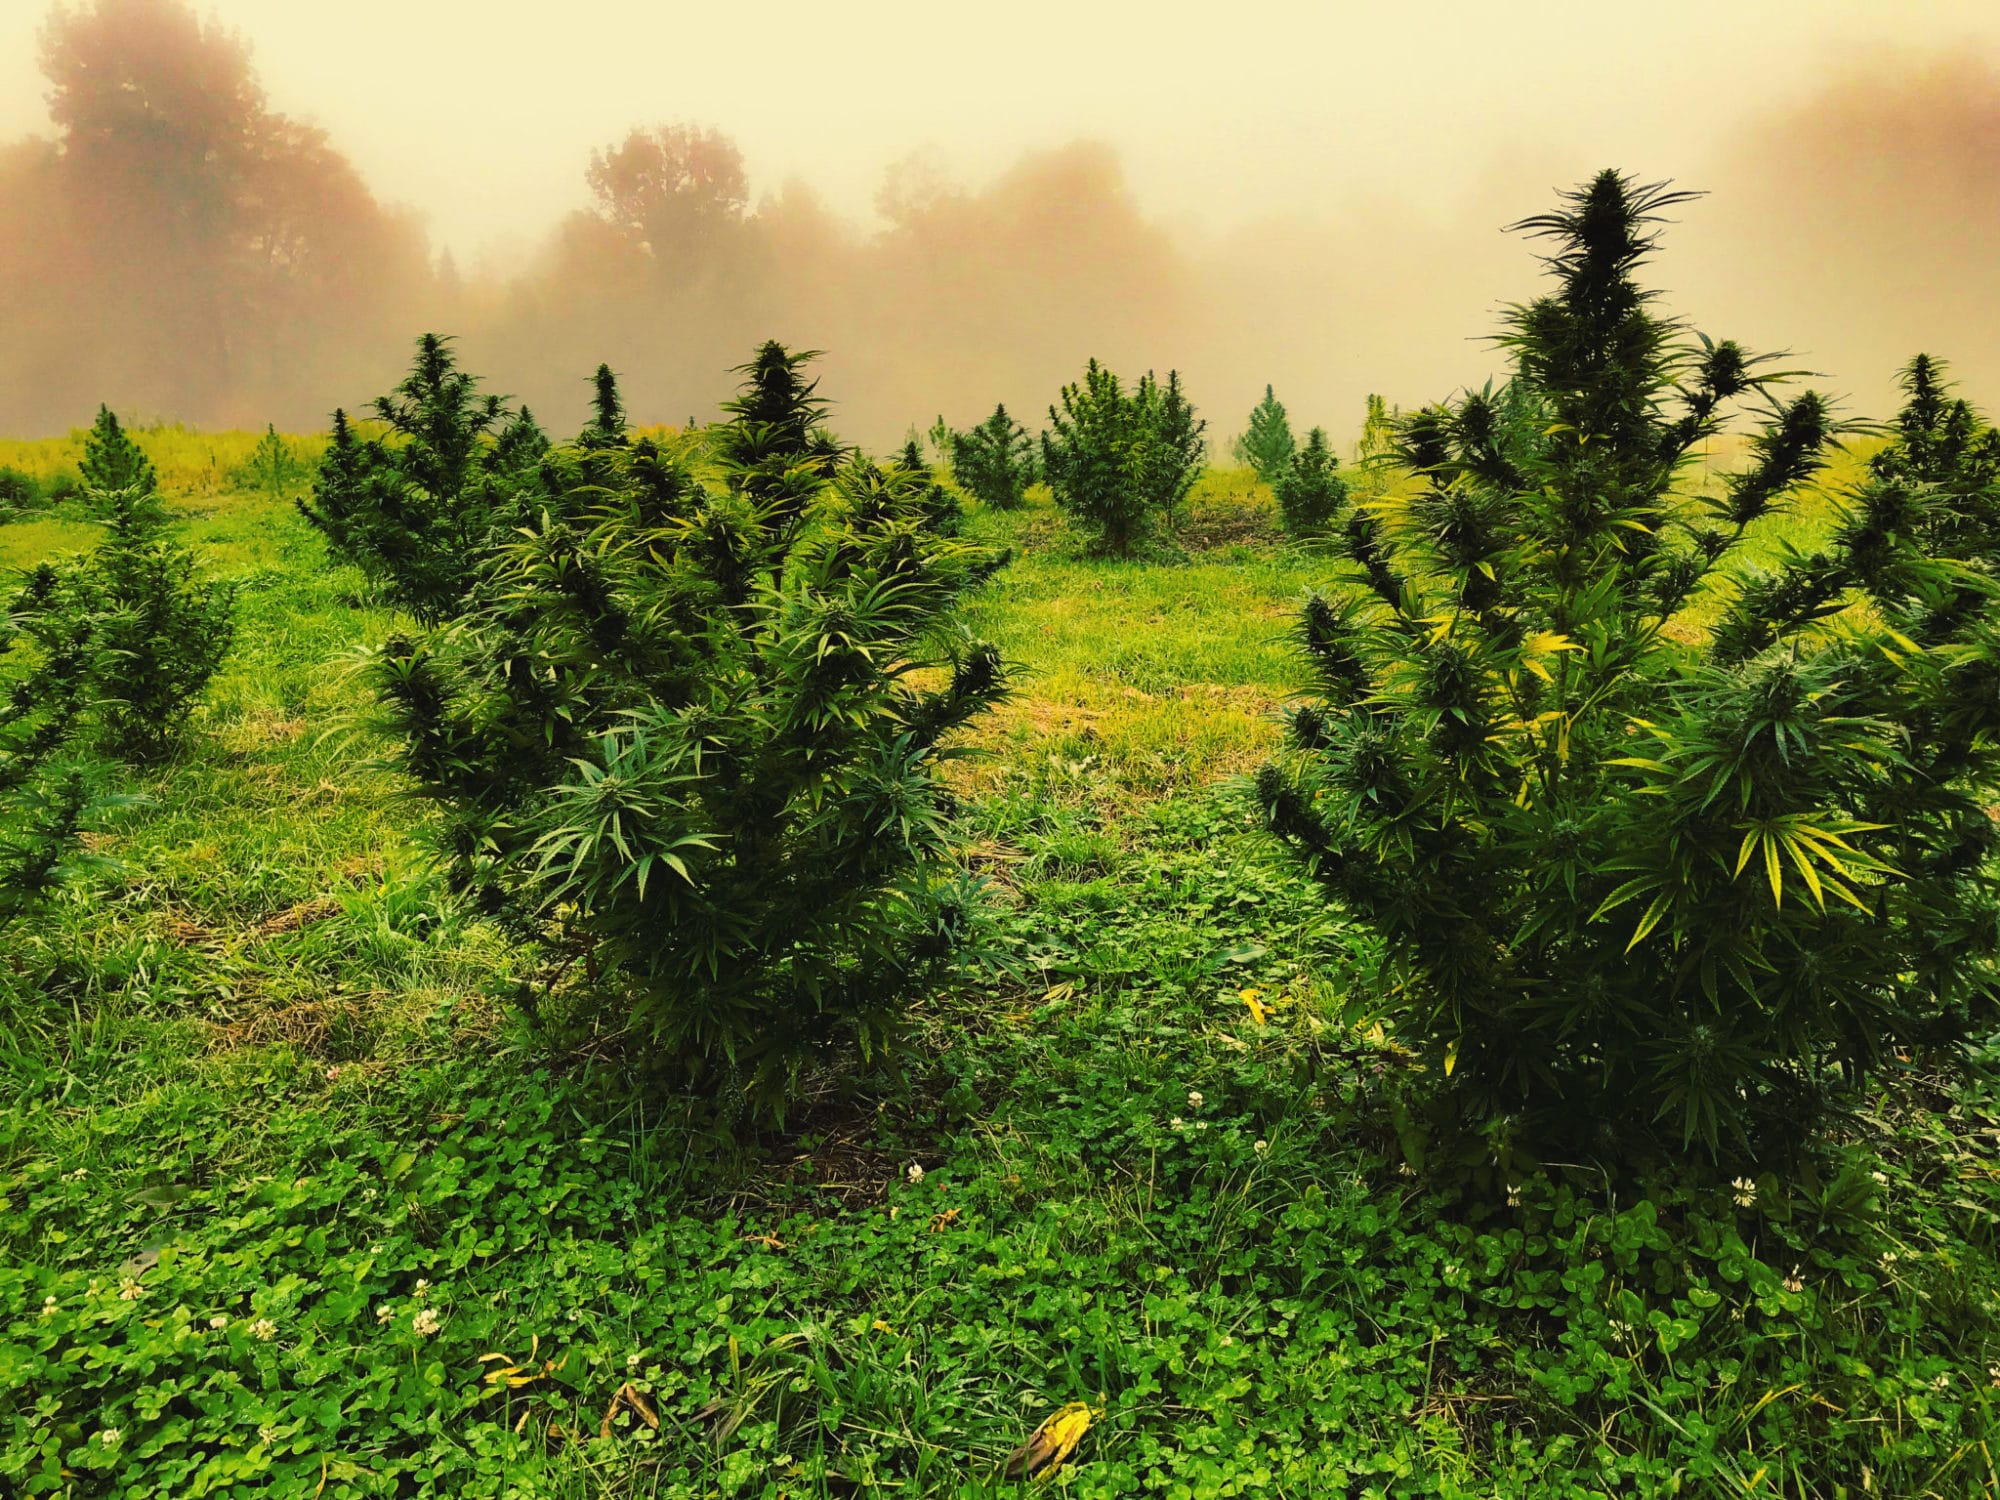 Mature hemp plants in a field with fog and mist